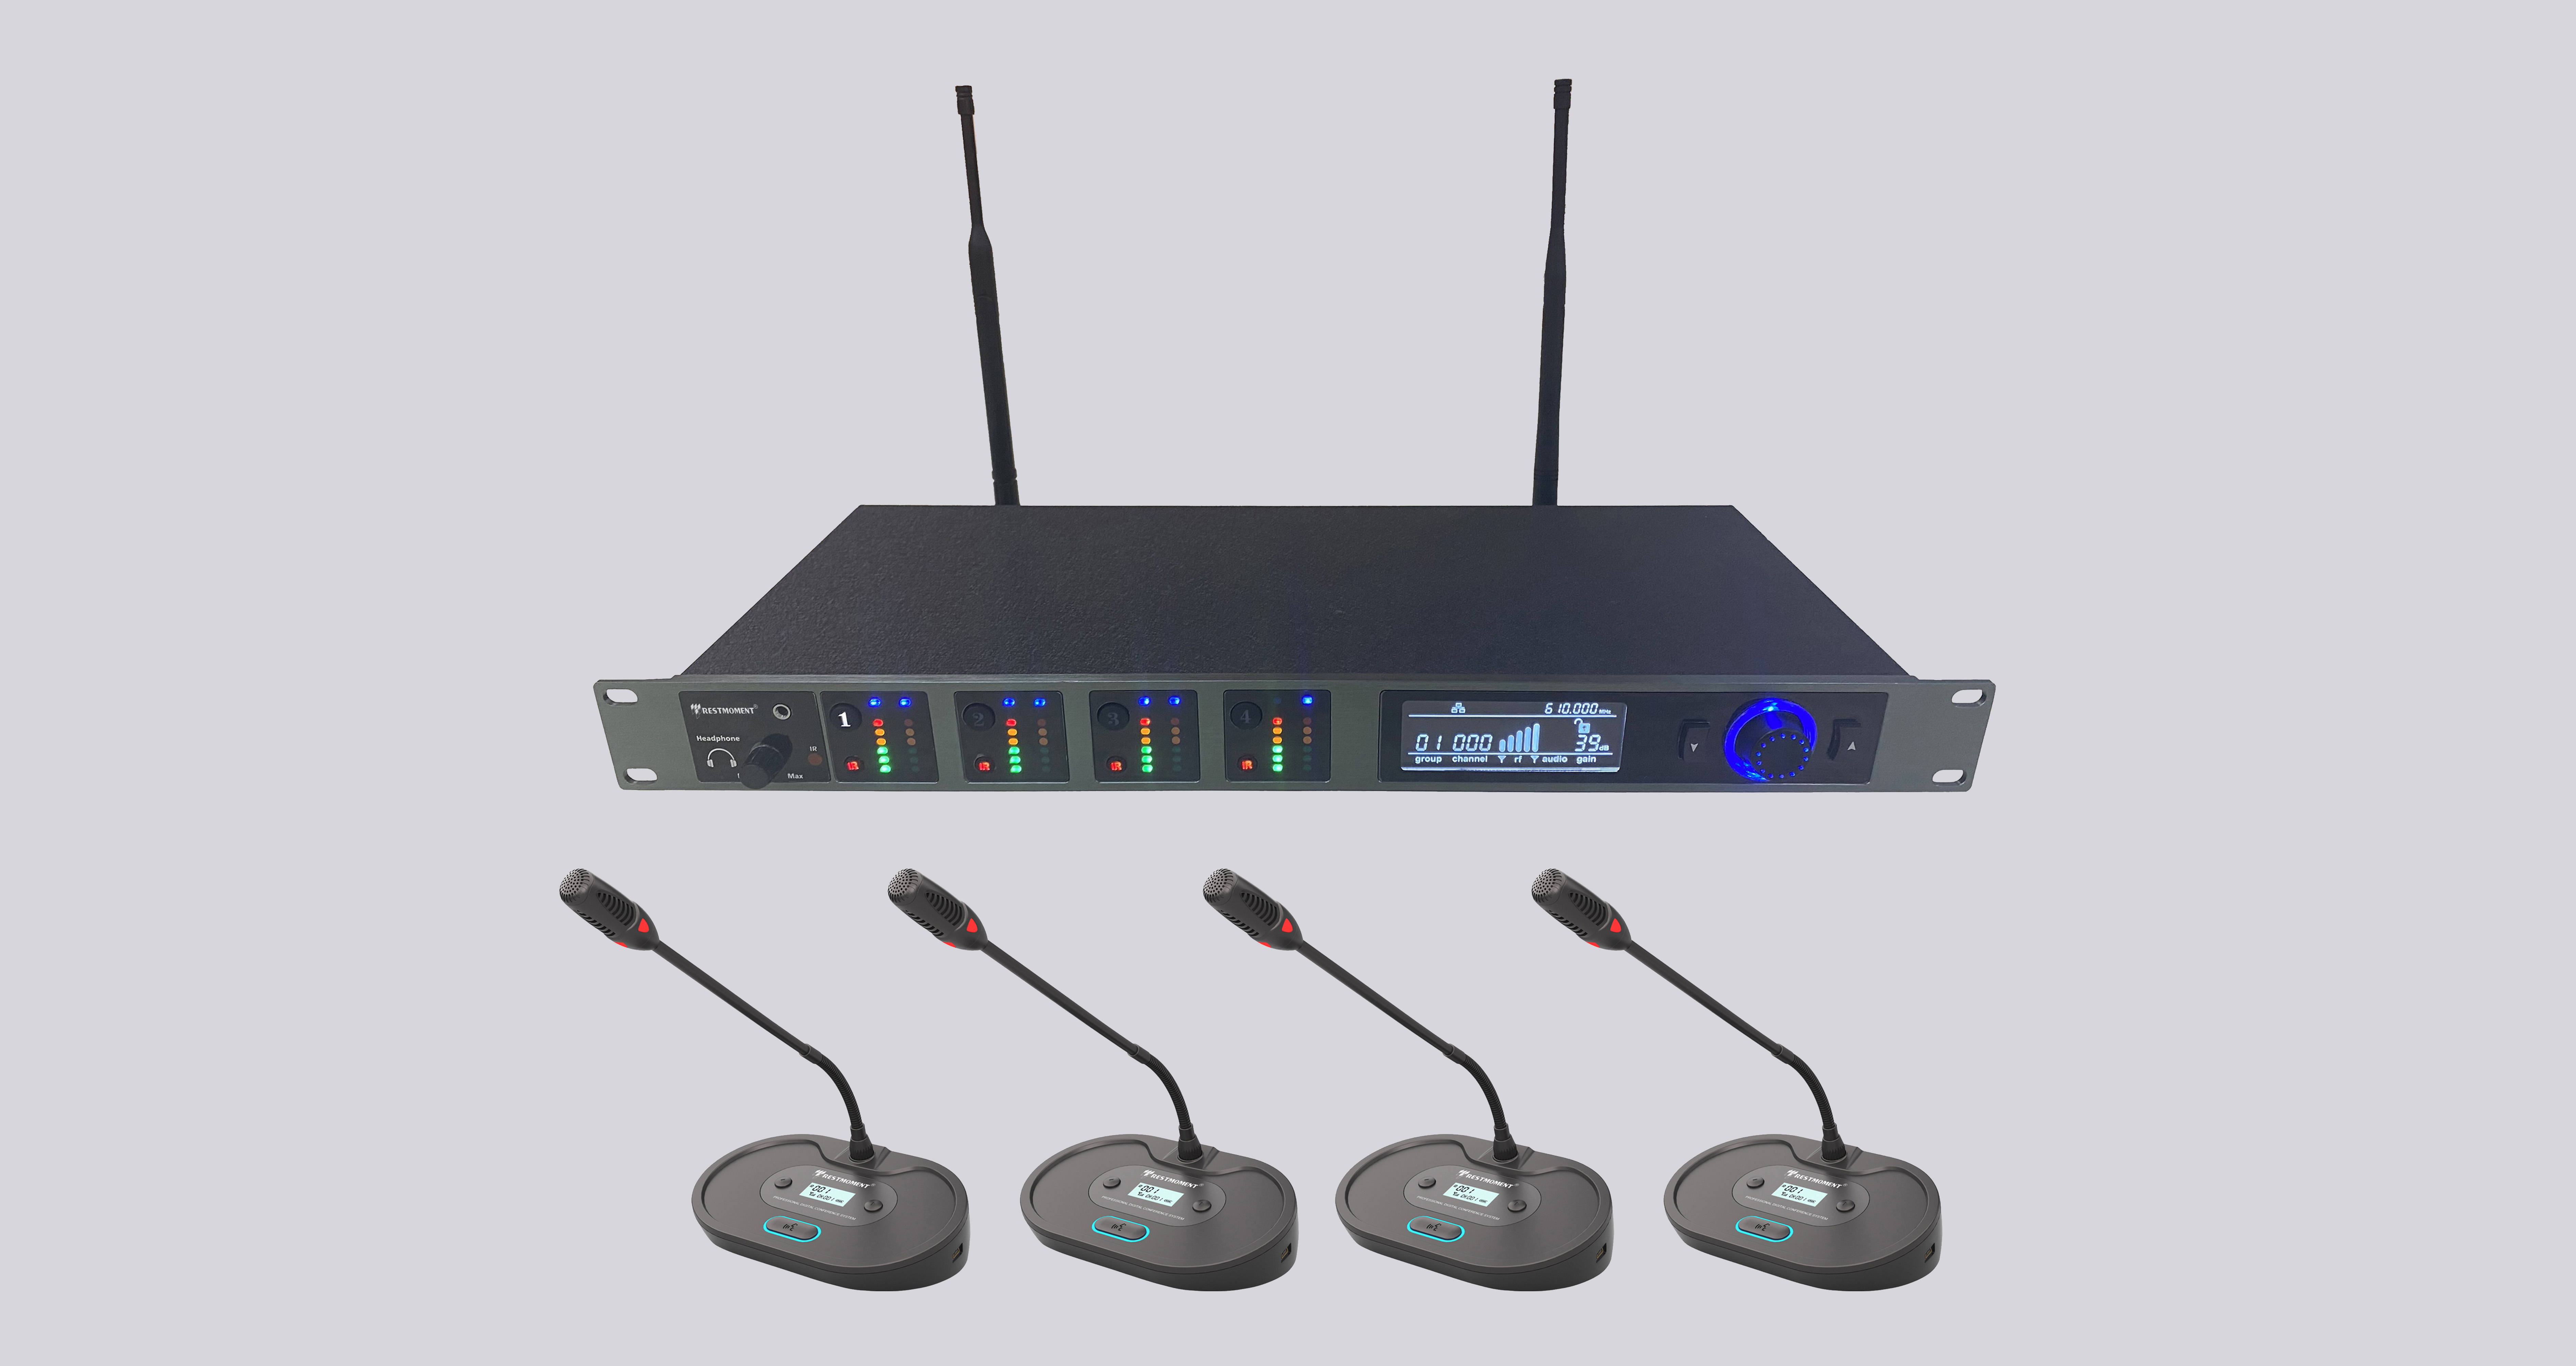 UHF wireless conference system